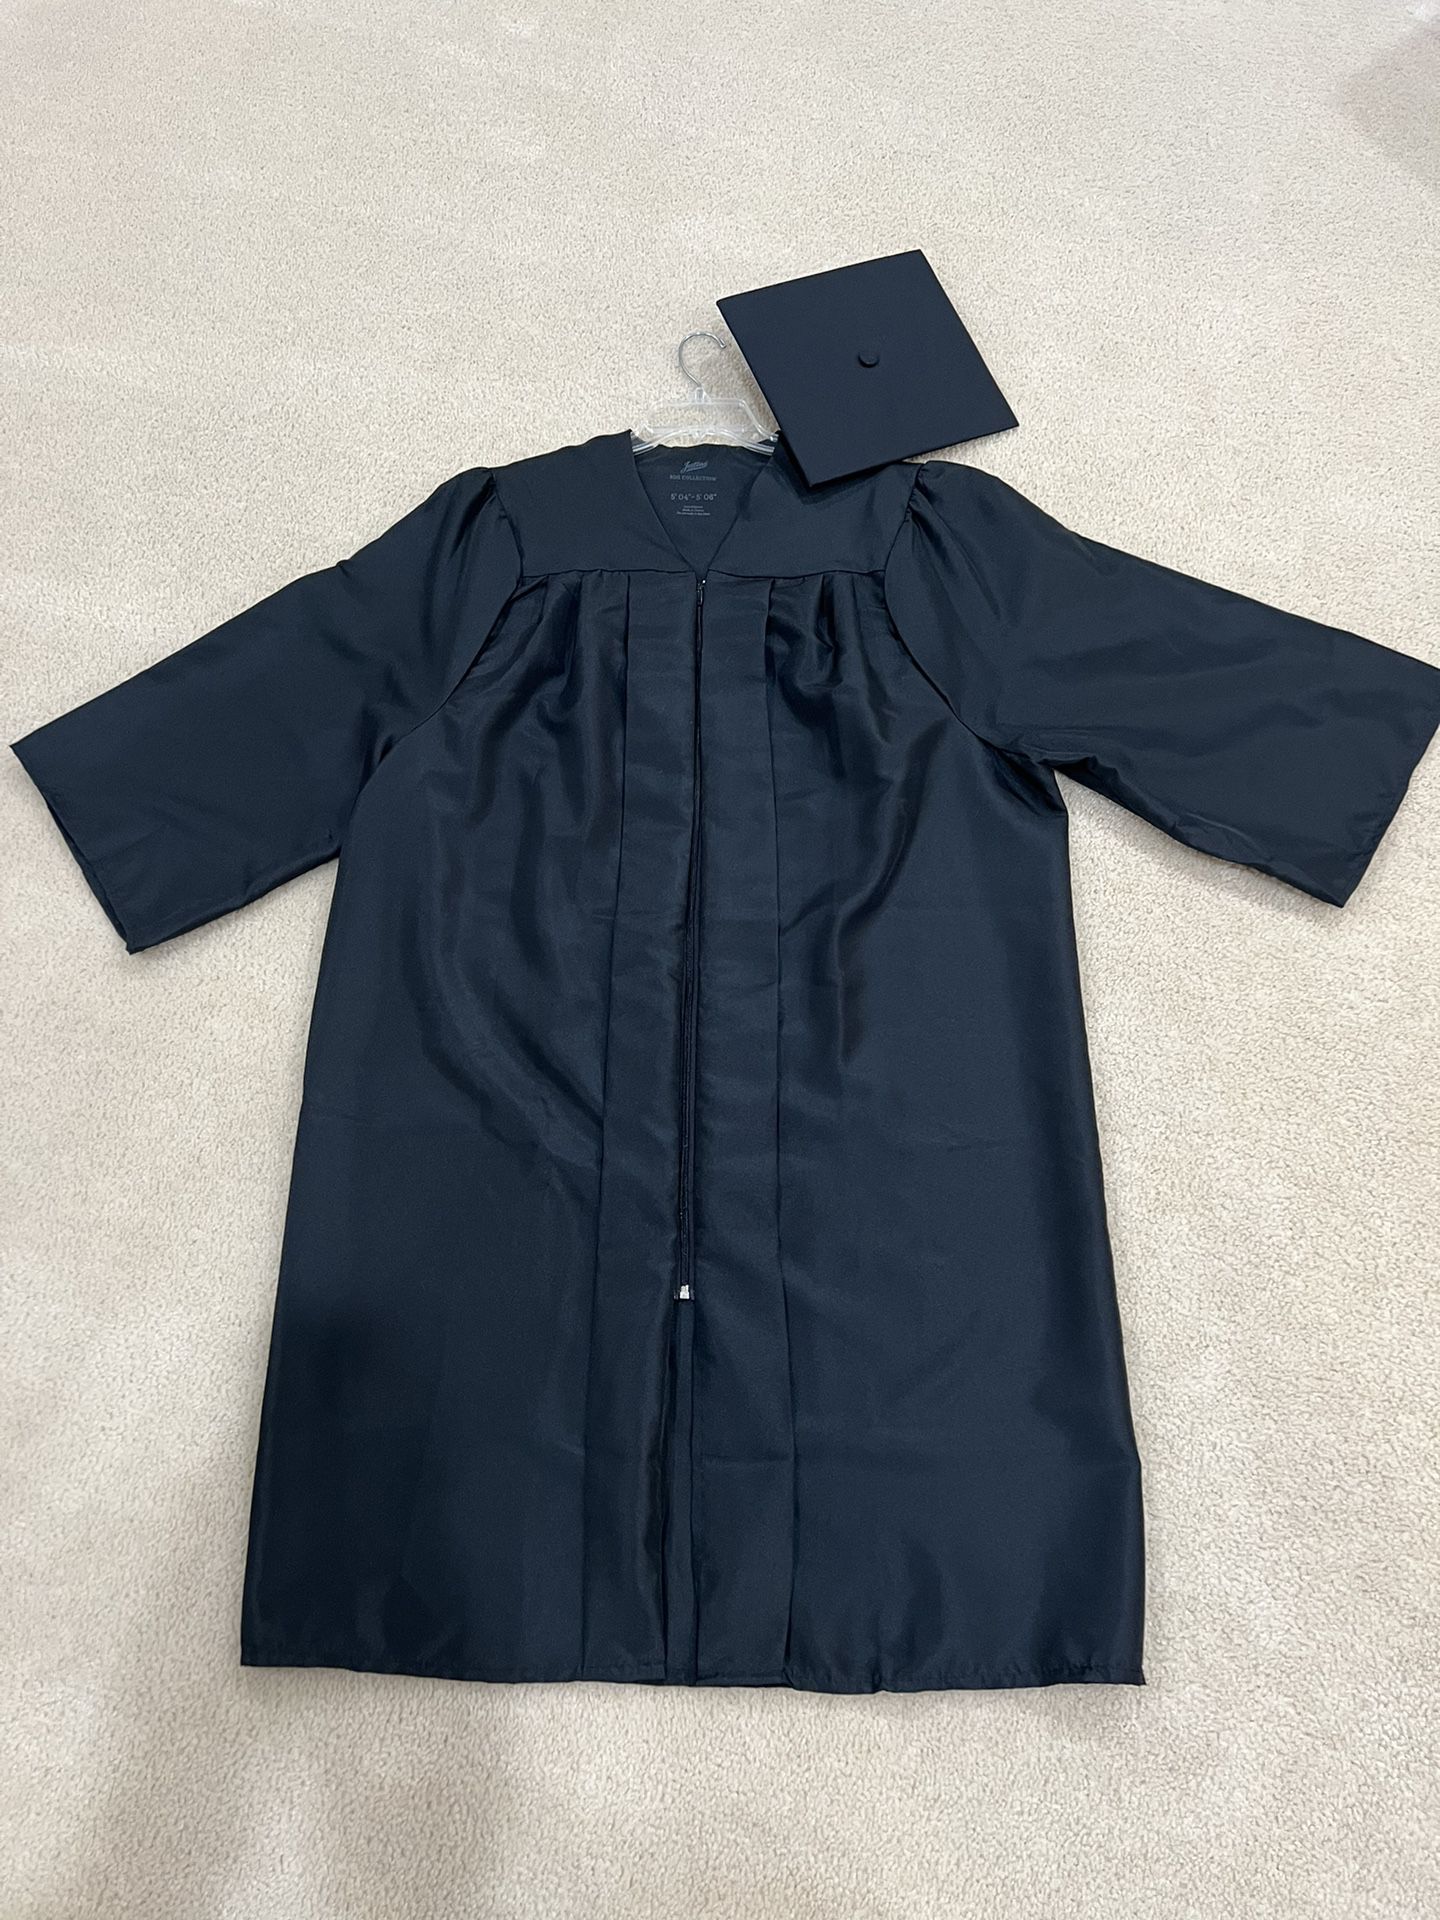 Jostens cap and Graduation Gown 5’4” To 5’6”